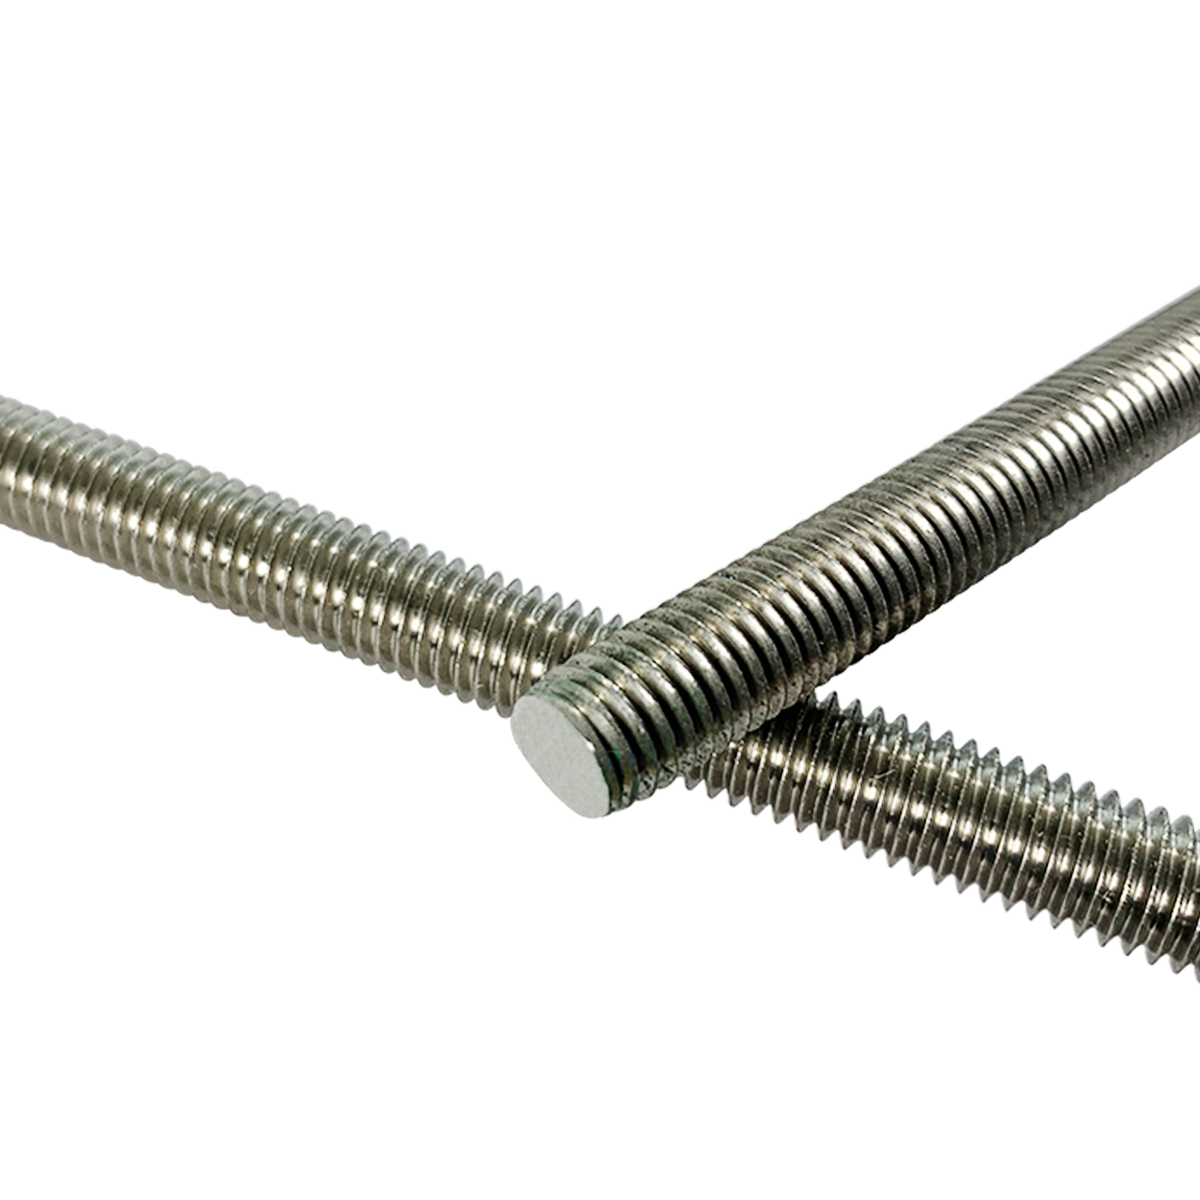 A length of bar which has a thread along its whole length. Offering a high level of corrosion resistance, the A2 stainless steel threaded bar, also known as threaded bar or studding is available at competitive prices with Fusion Fixings